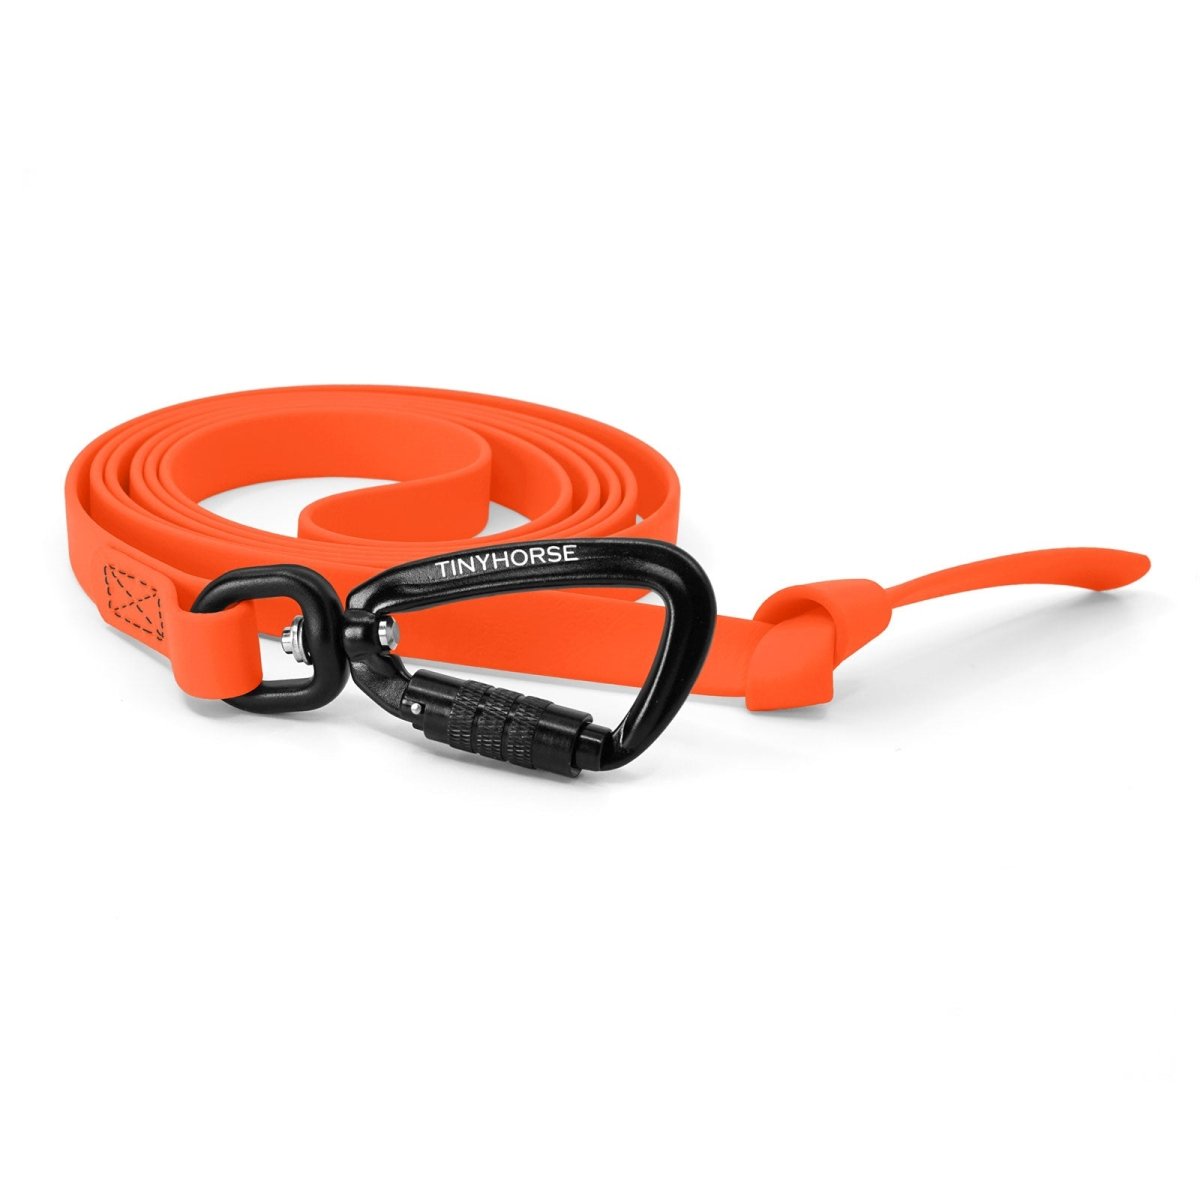 A neon orange-coloured Step Line made of BioThane and 2 auto-locking carabiners